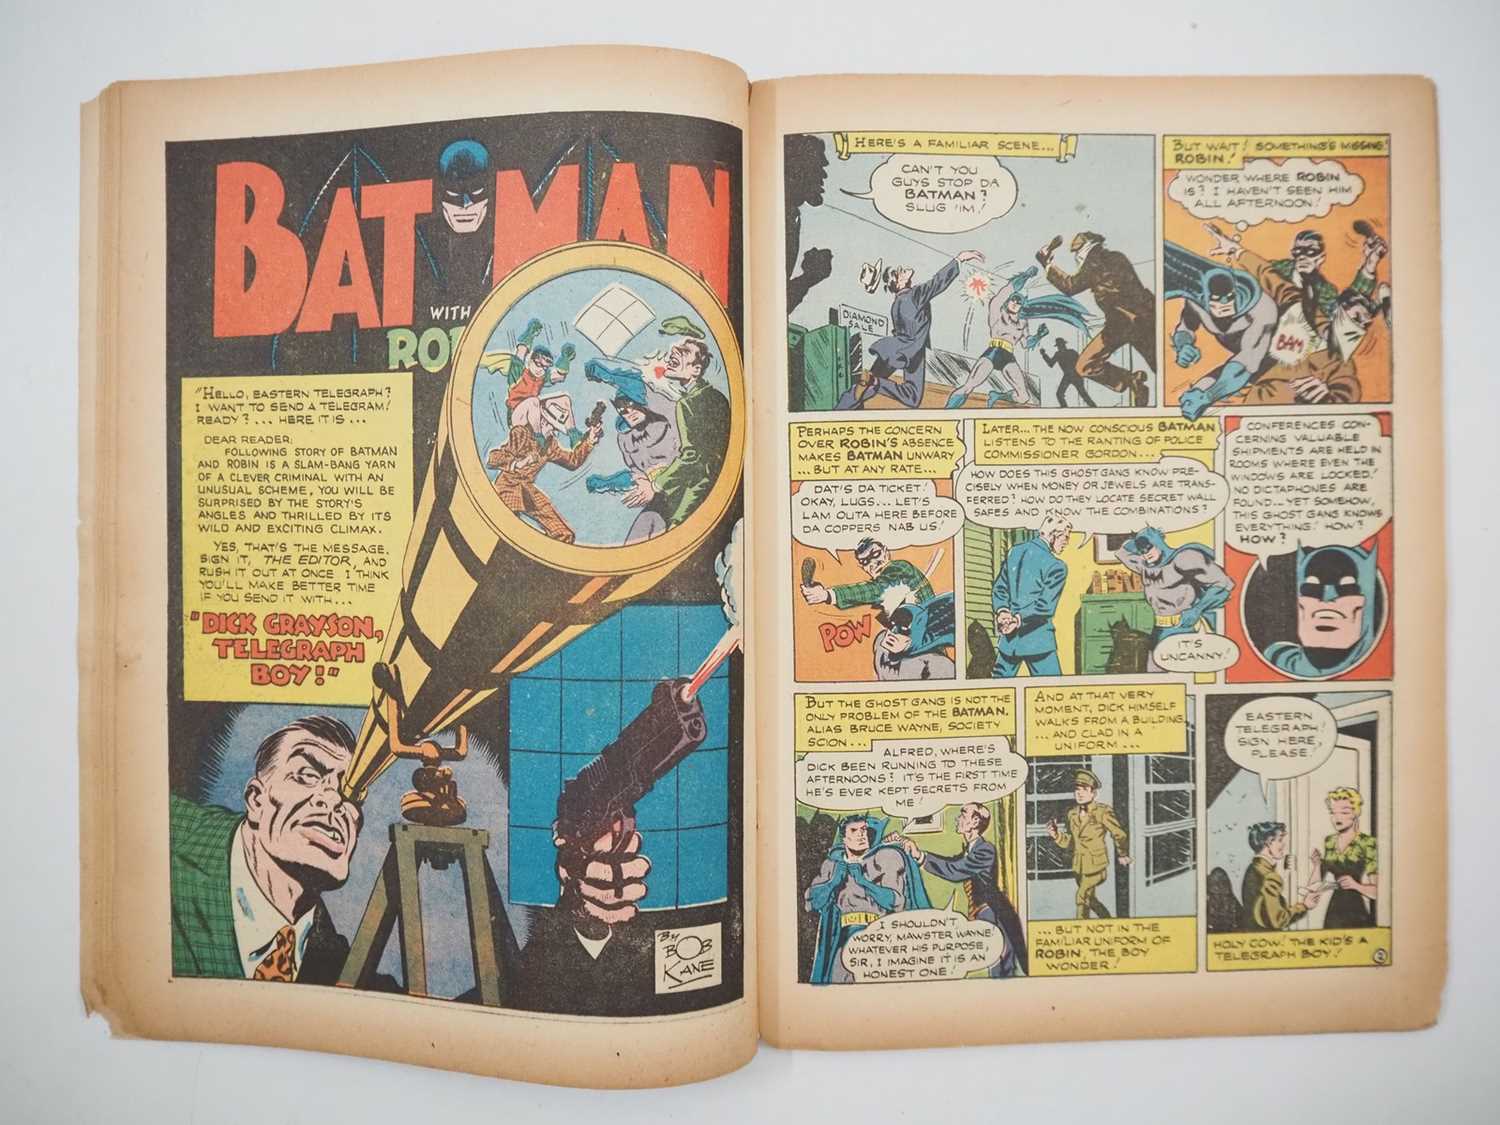 BATMAN #22 (1944 - DC) - First cover appearance and first solo story featuring Alfred - Dick - Image 12 of 37